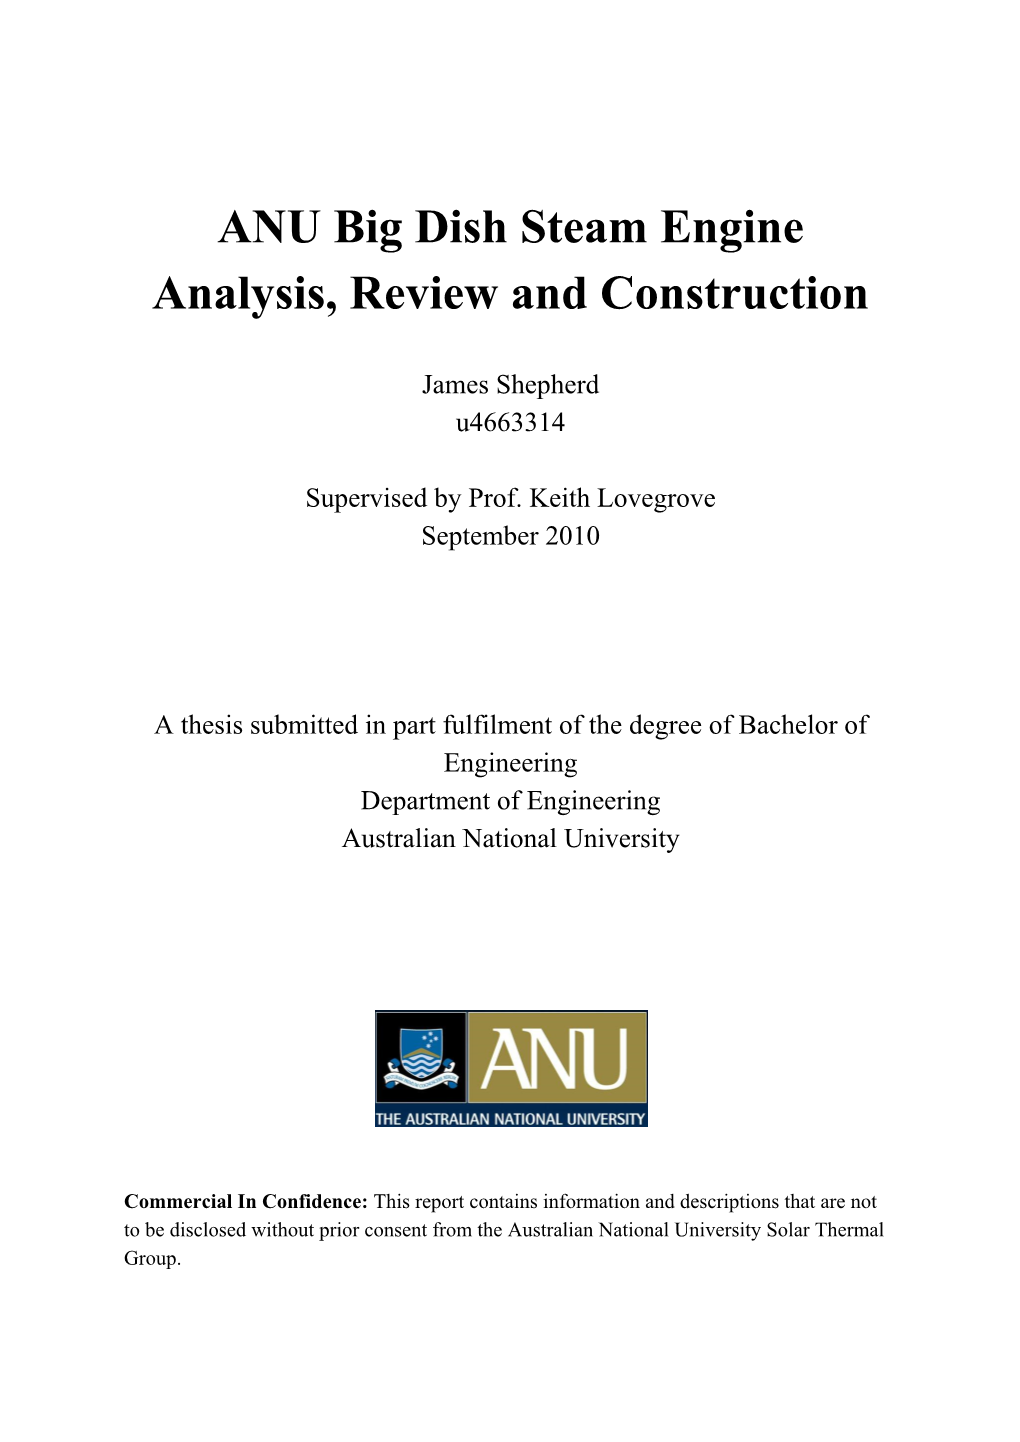 ANU Big Dish Steam Engine Analysis, Review and Construction